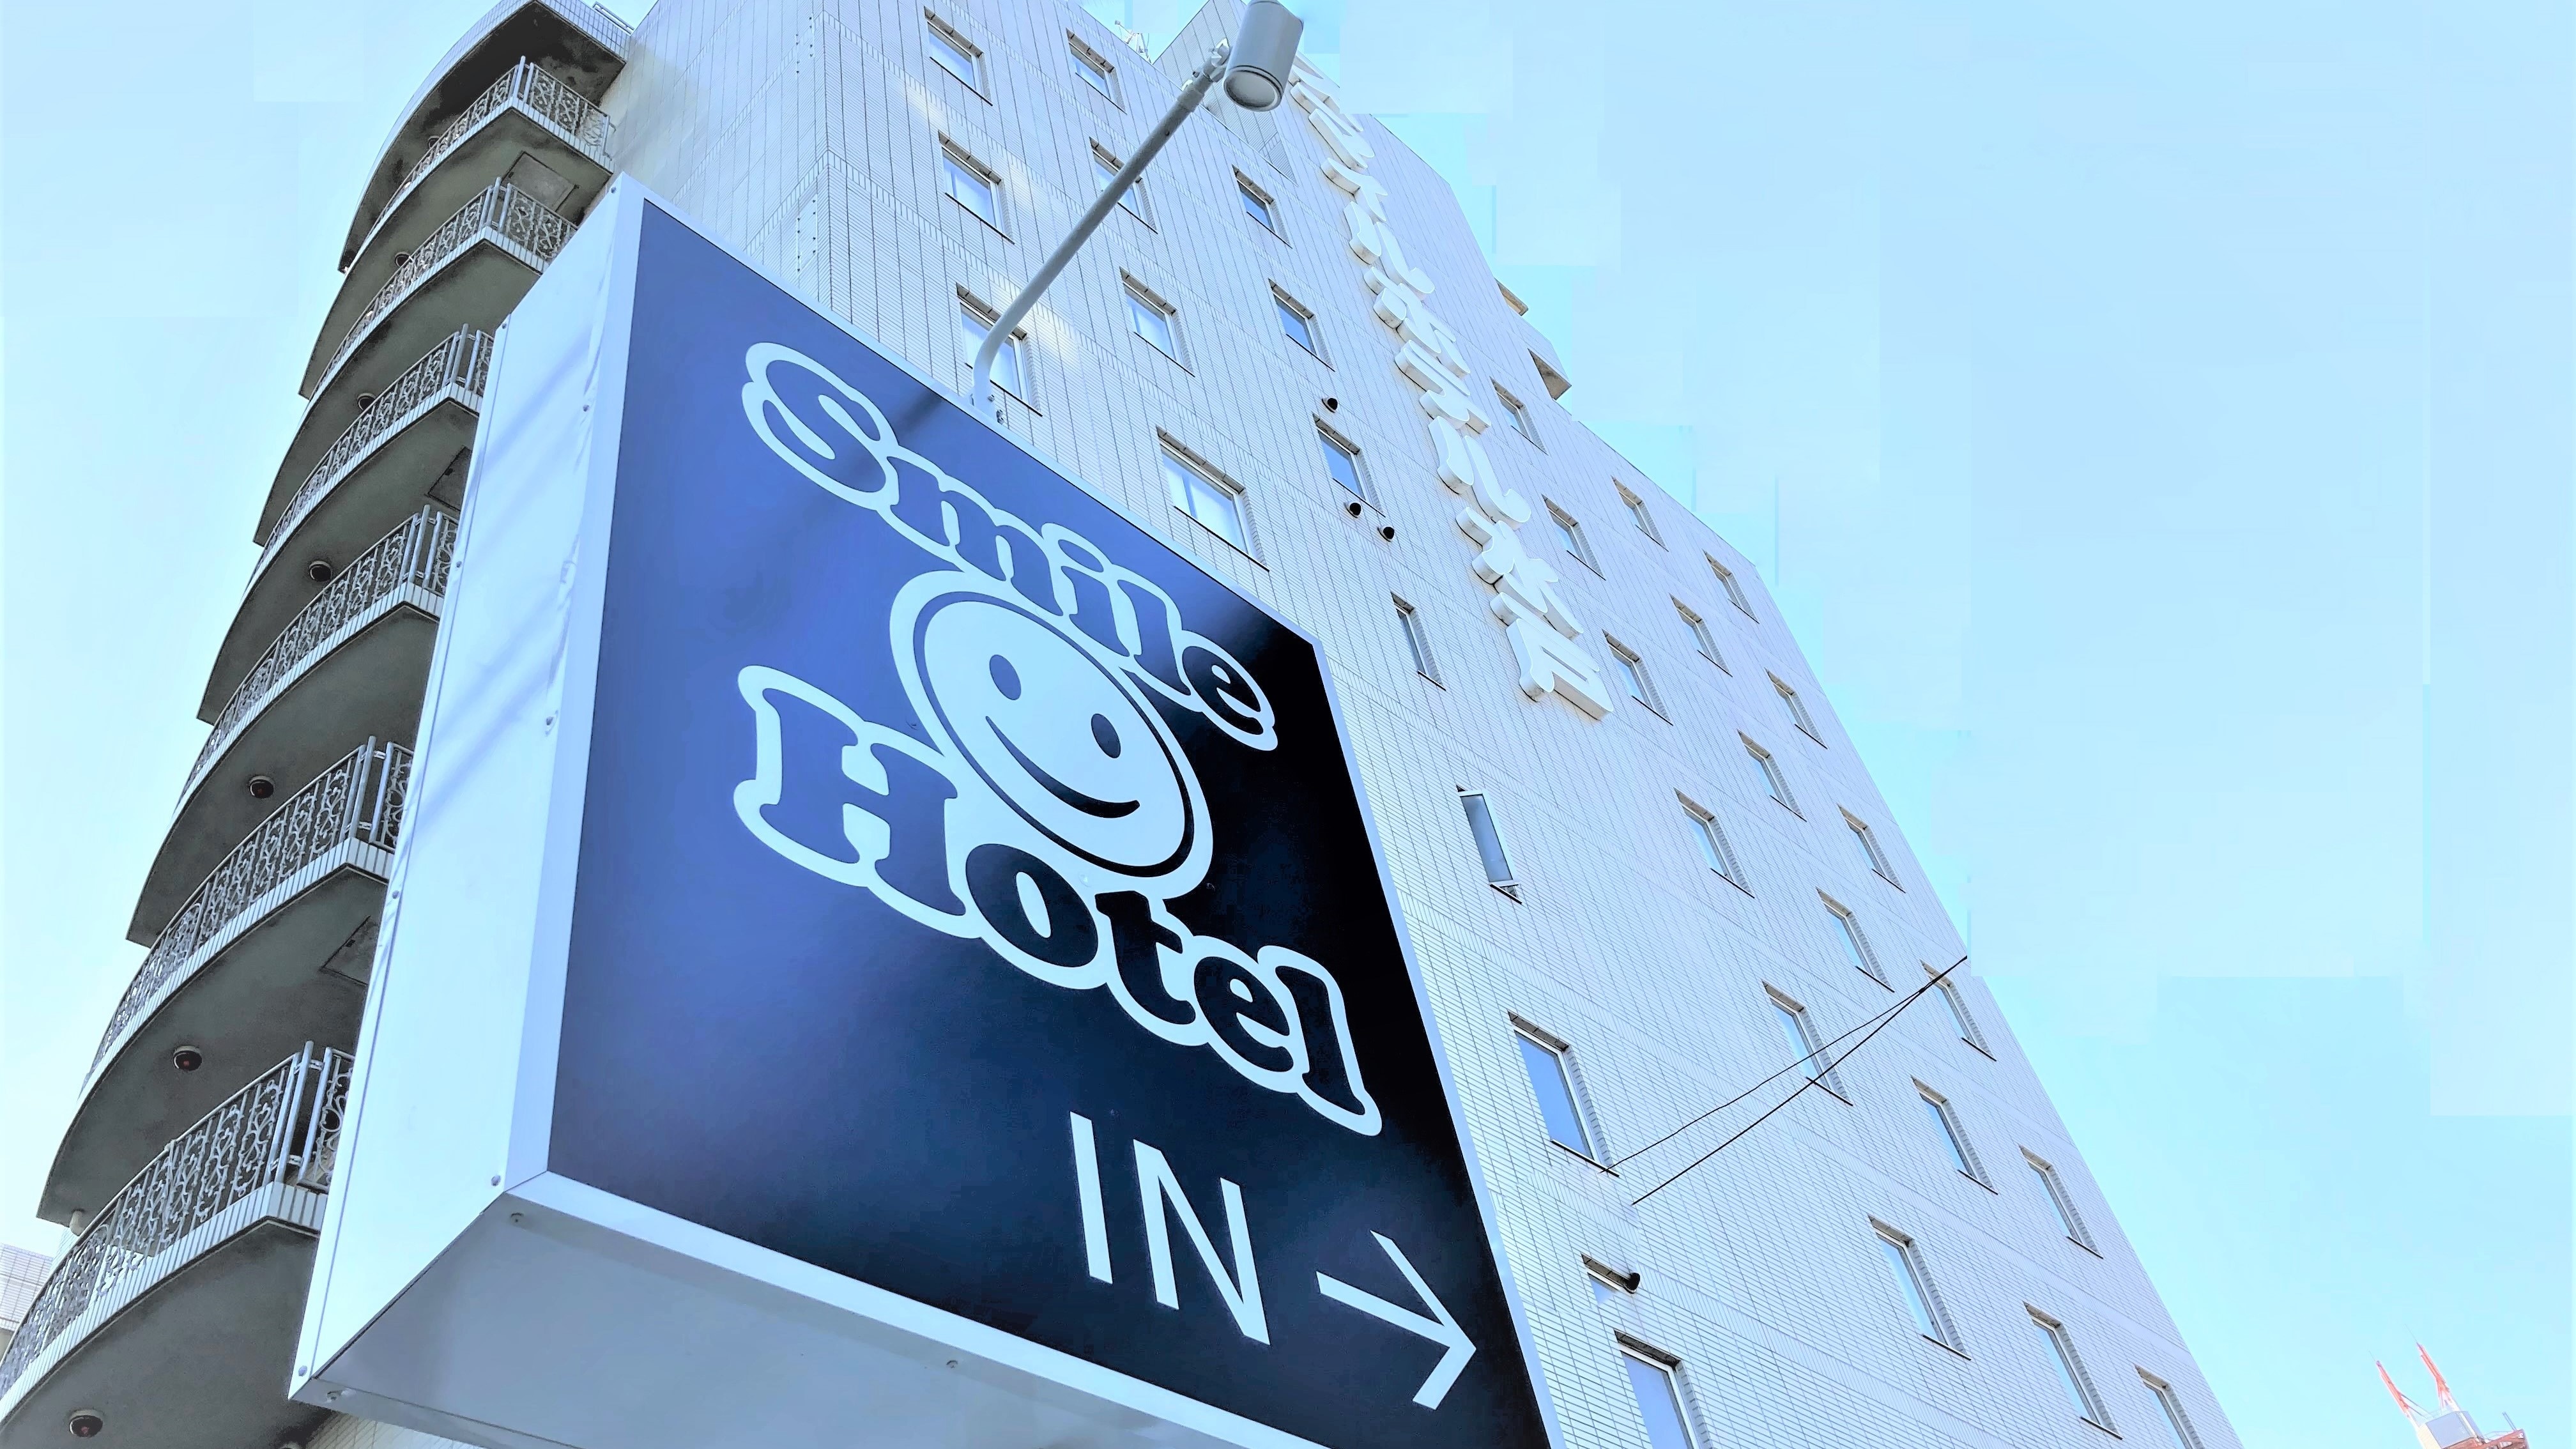 Hotel exterior (front sign)